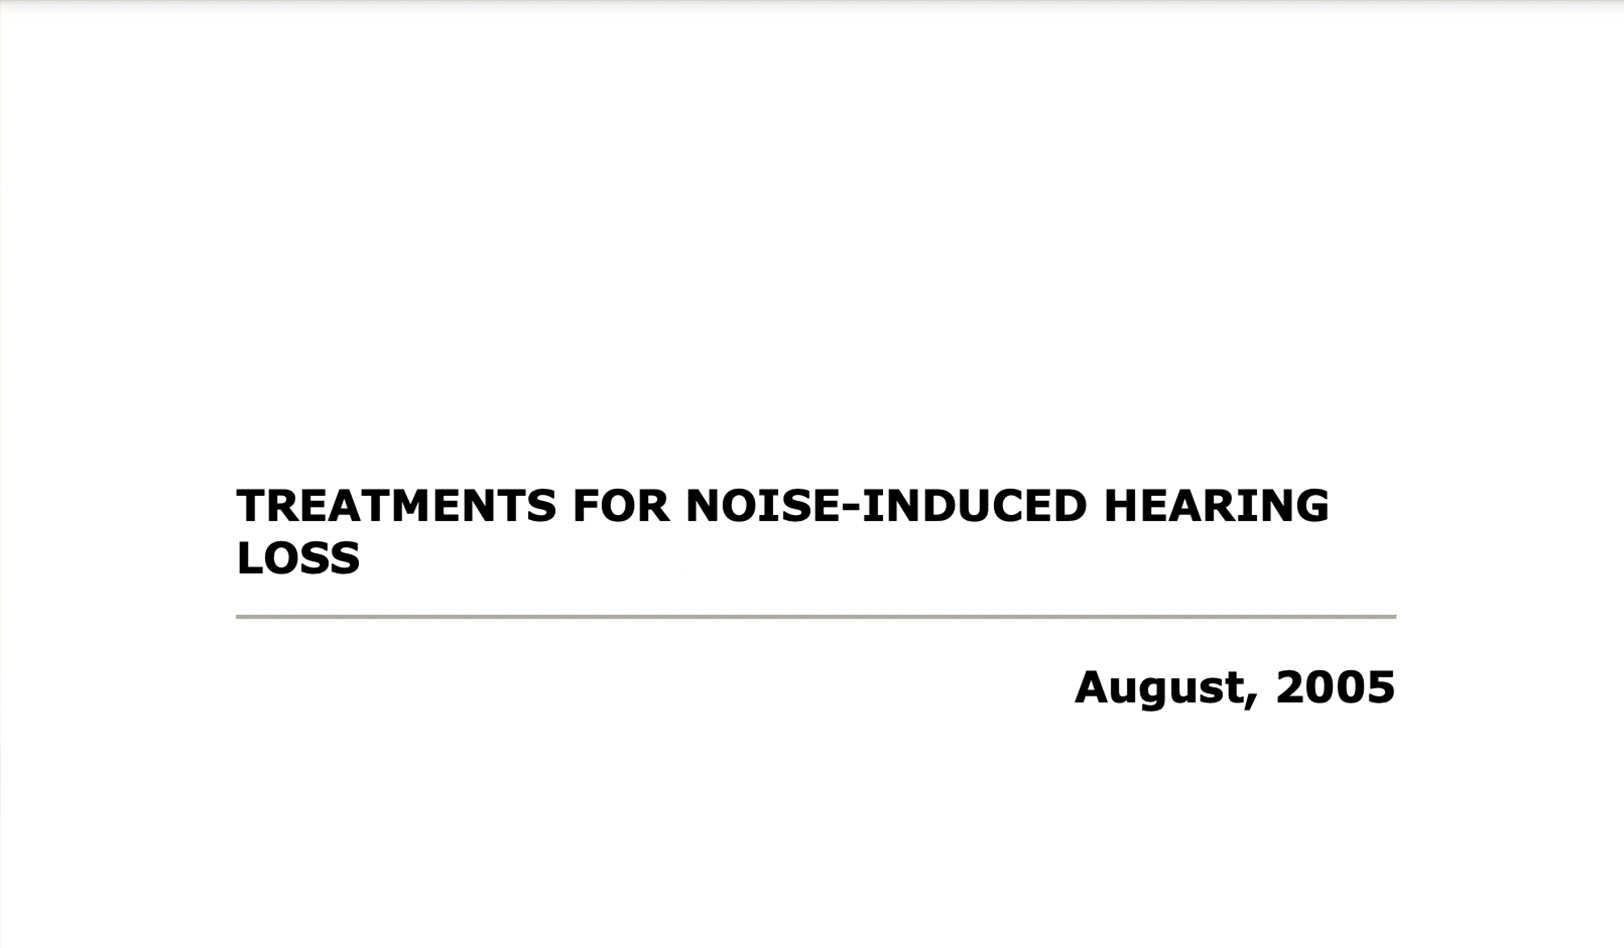 Treatments for Noise-Induced Hearing Loss (NIHL) Report